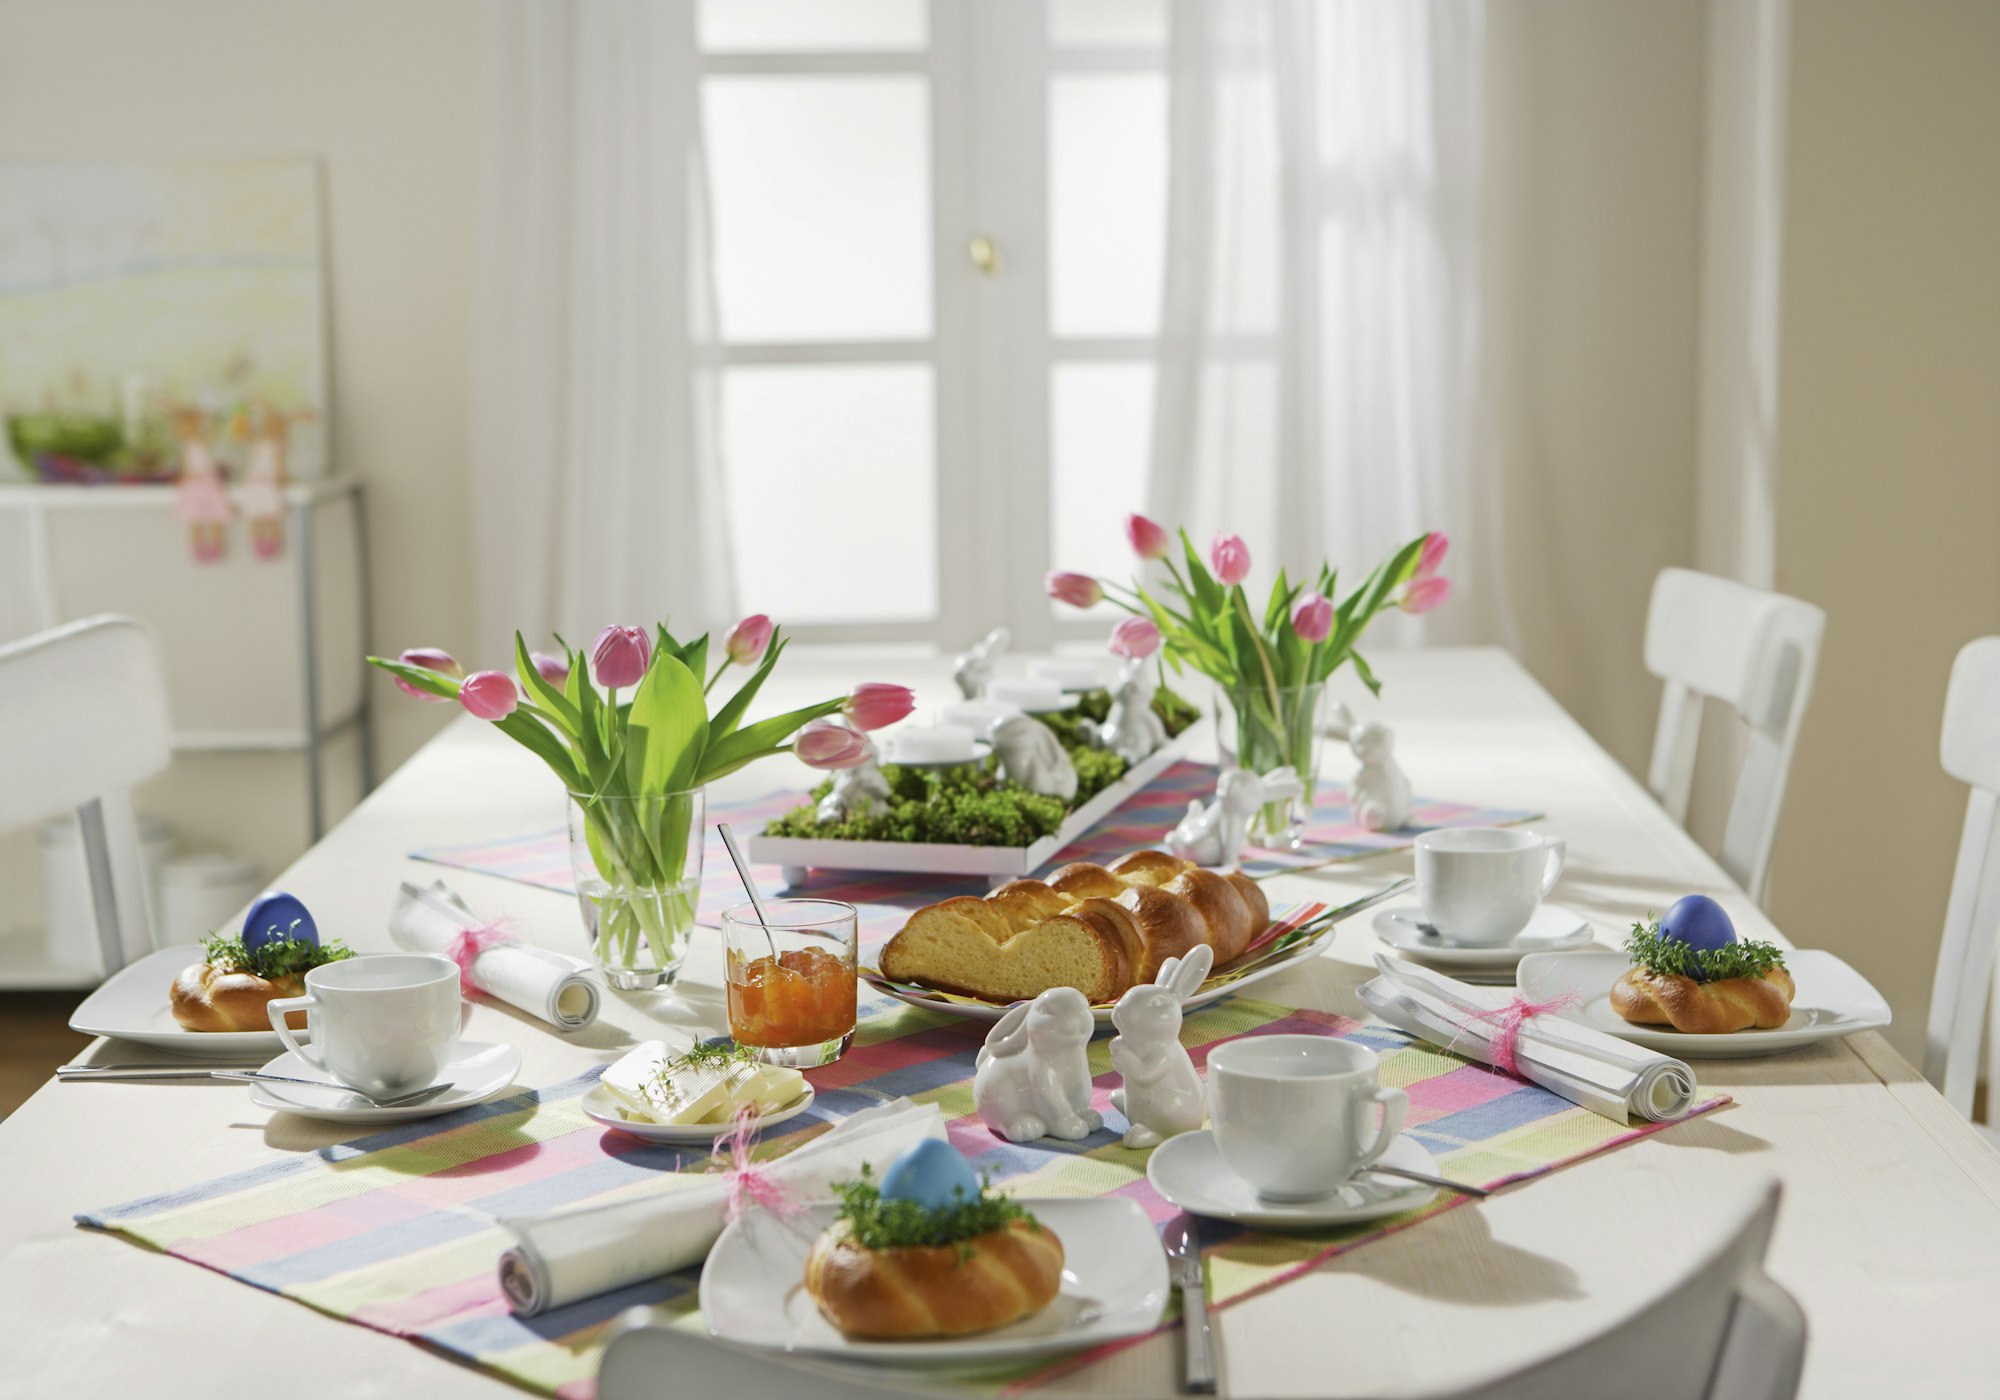 Dining table with easter breakfast setting